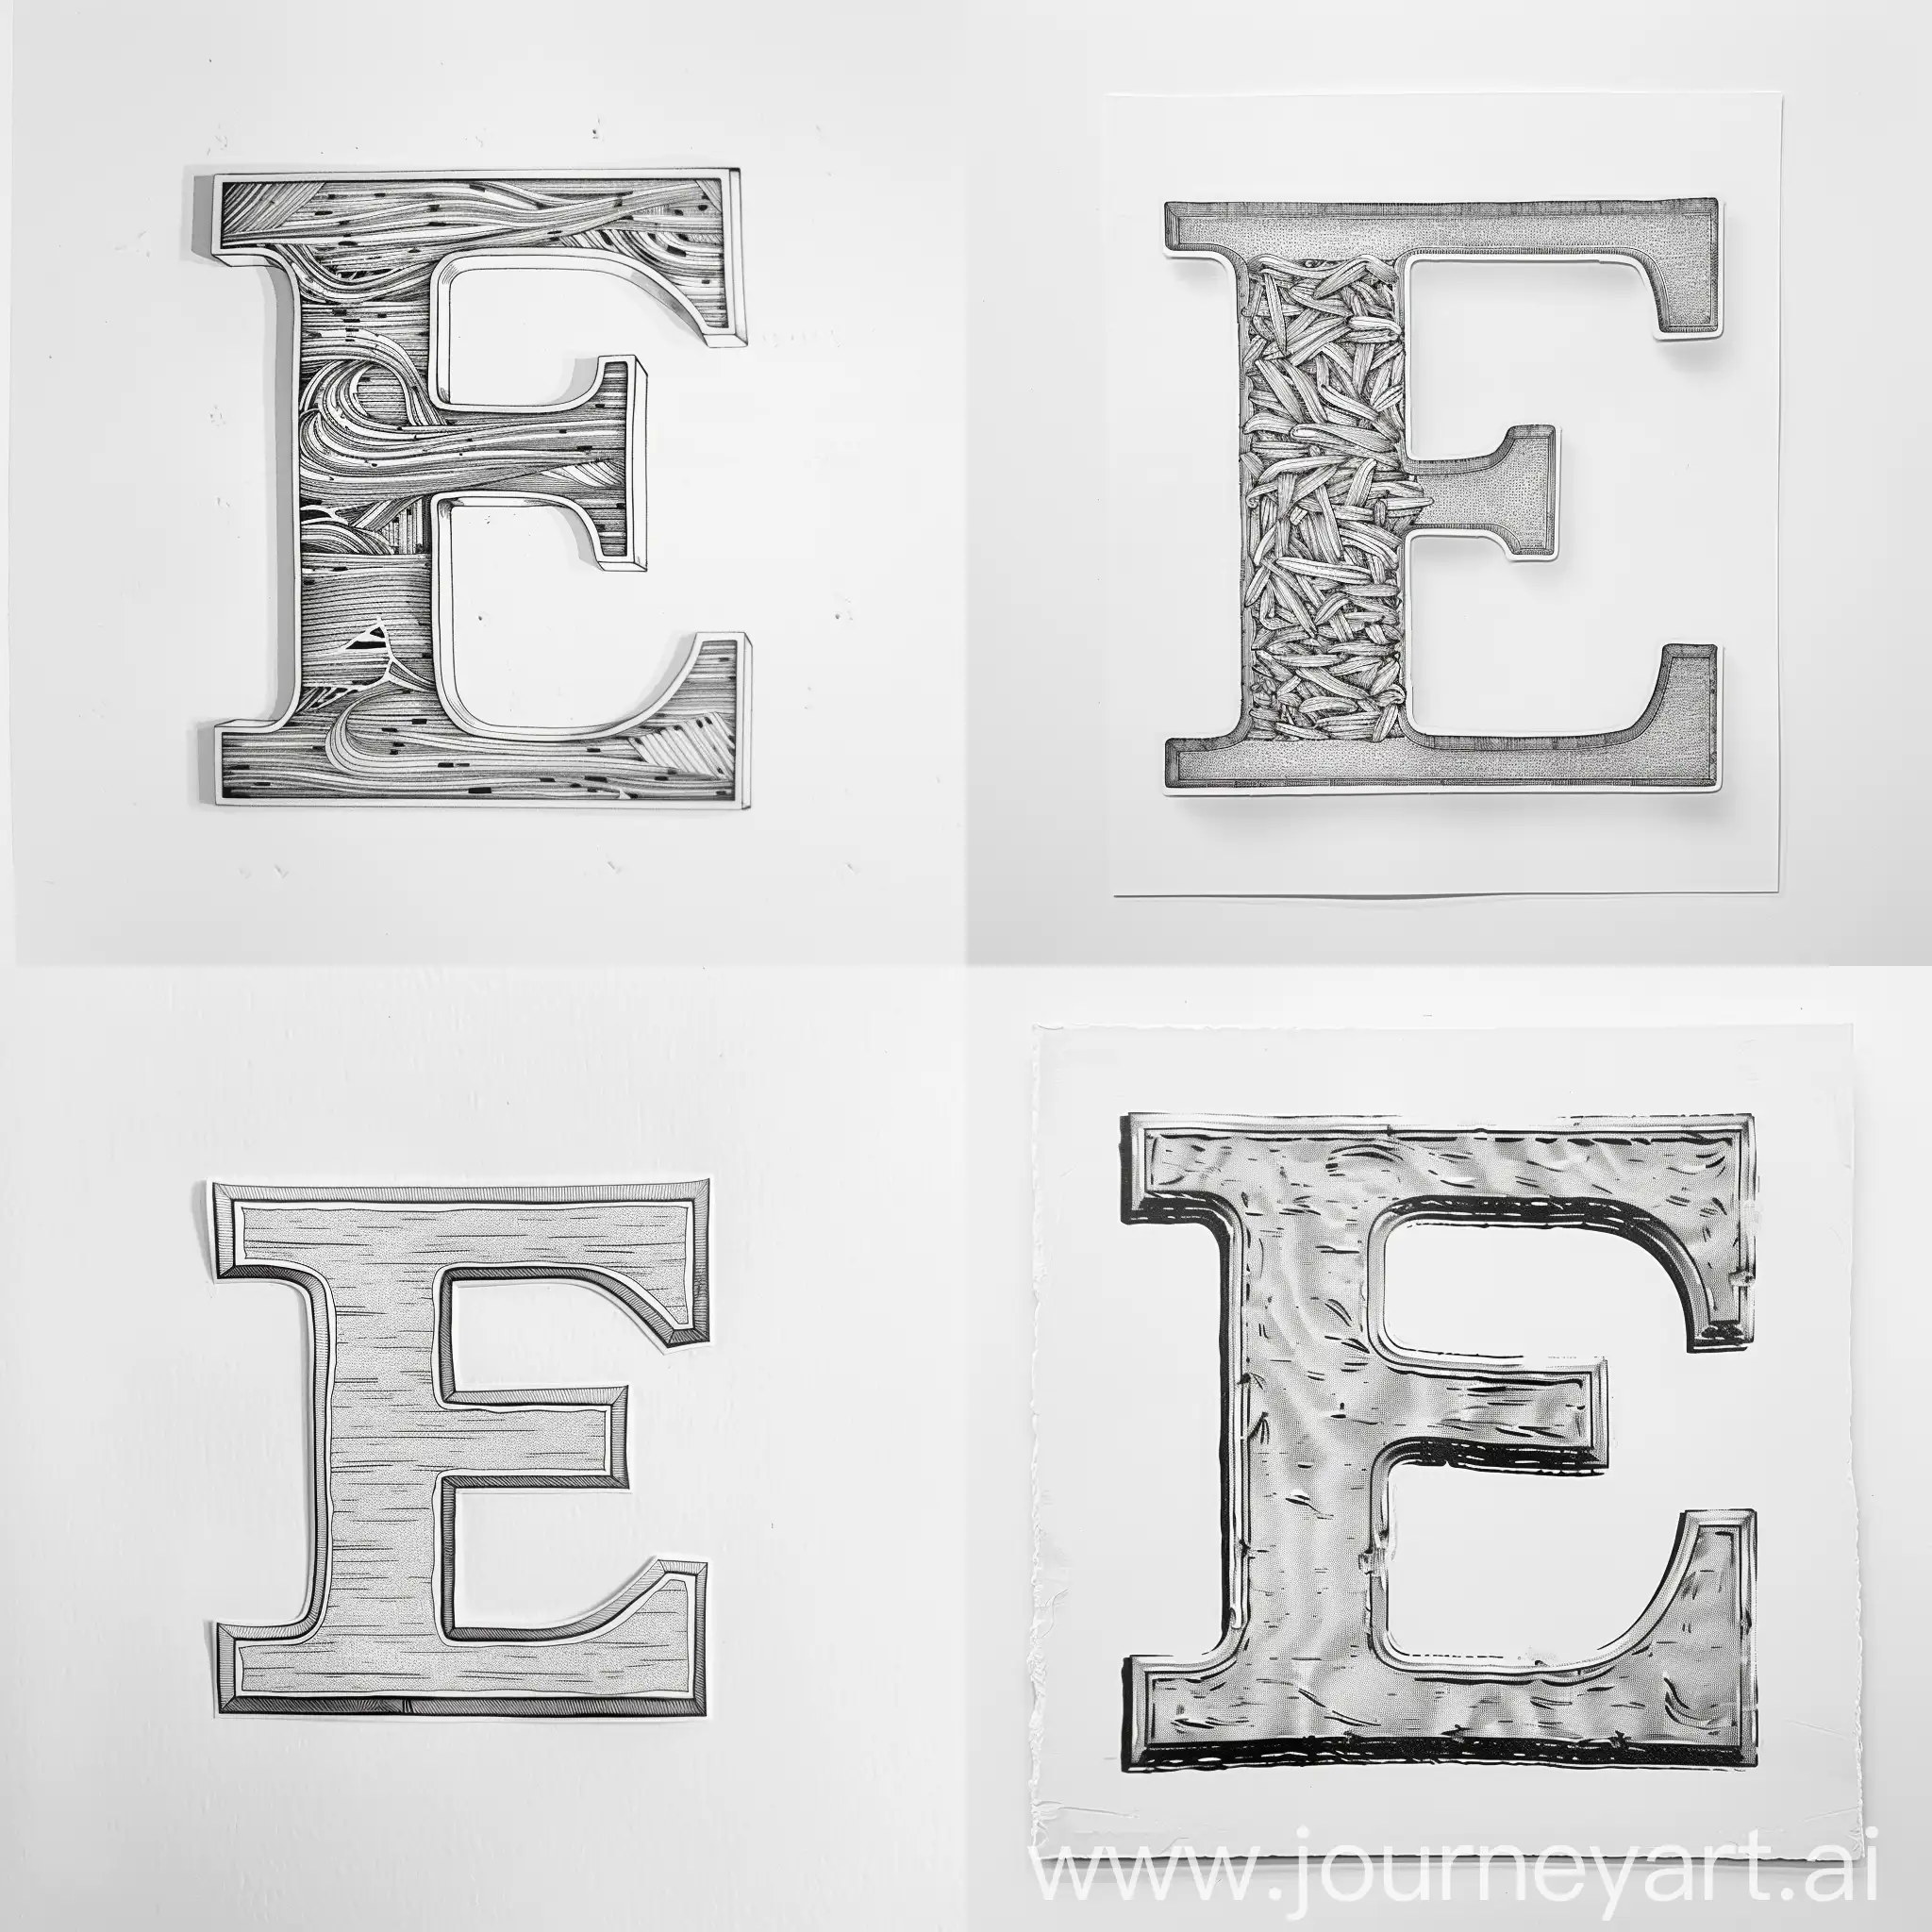 Monochrome-Line-Art-Linear-Silhouette-of-the-Letter-E-on-White-Surface